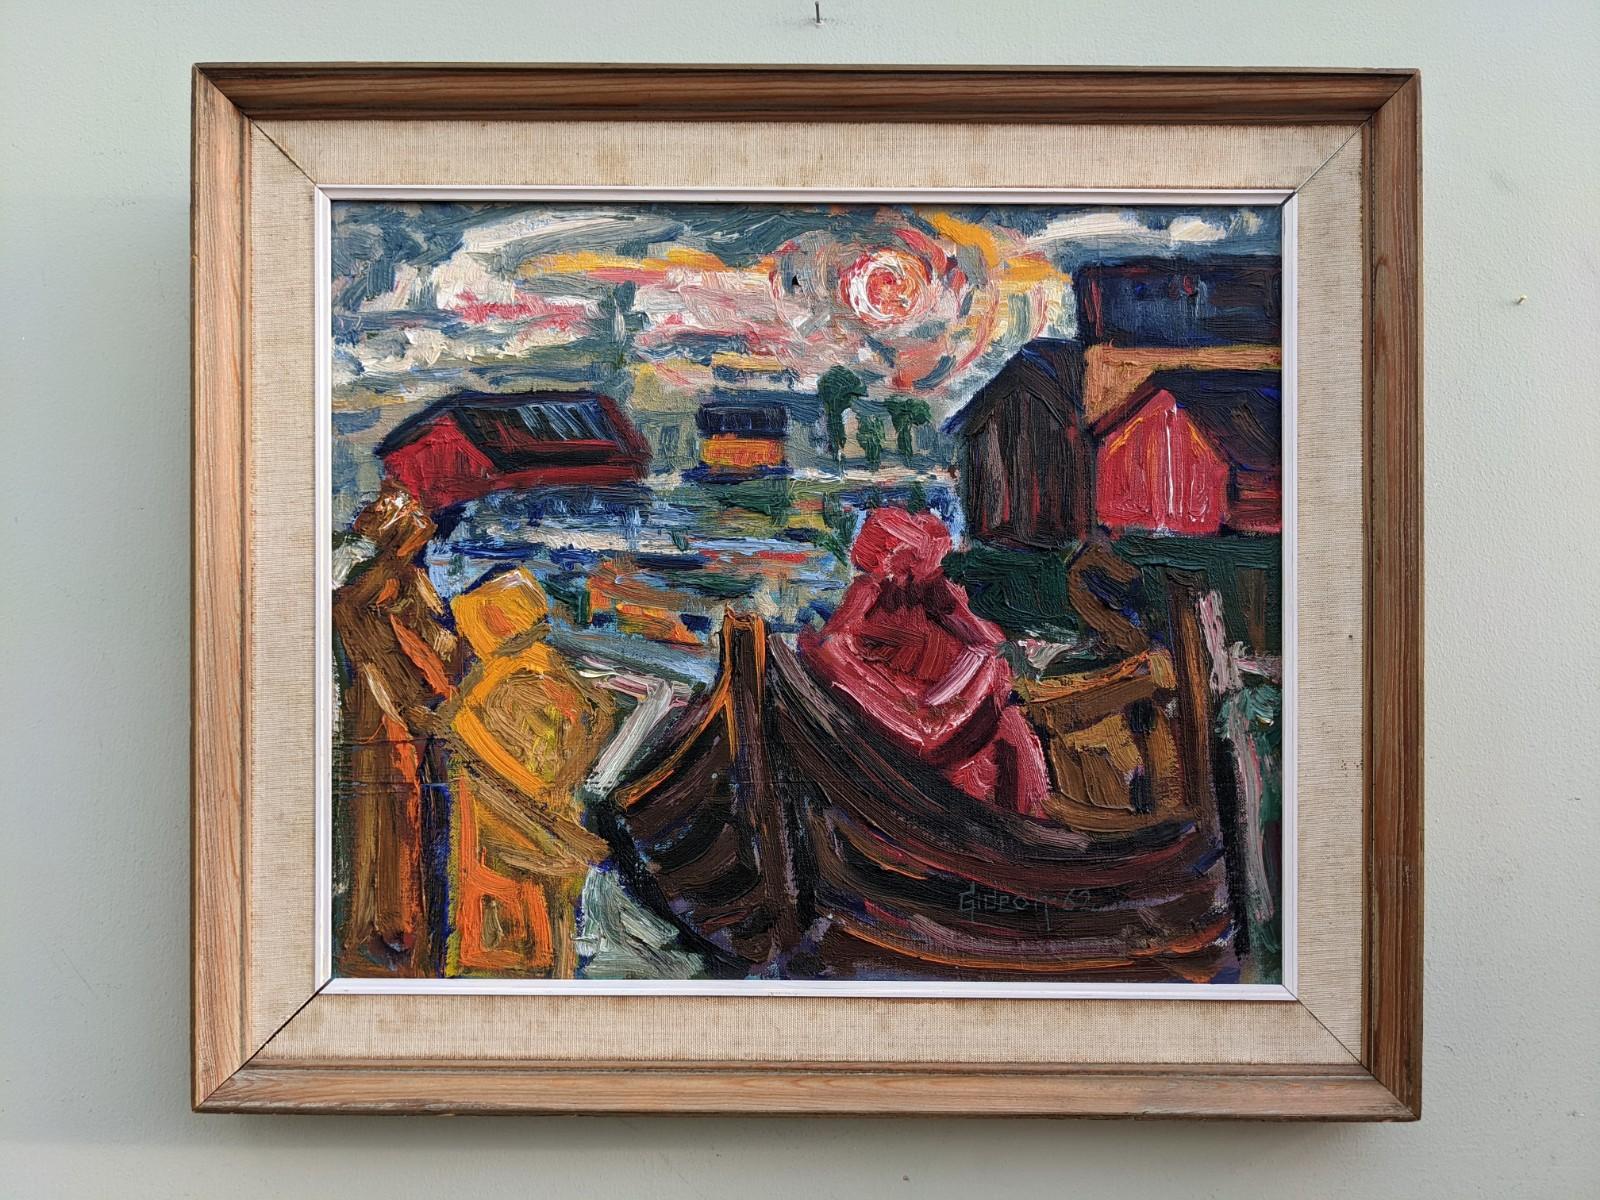 VIVID LAKE 
Oil on canvas
Size: 48 x 56 cm (including frame)

A bold and intensely coloured mid century modernist oil composition on canvas, painted in 1962.

Depicted in this picture is a group of figures, one on a boat. Behind them sit harbourside